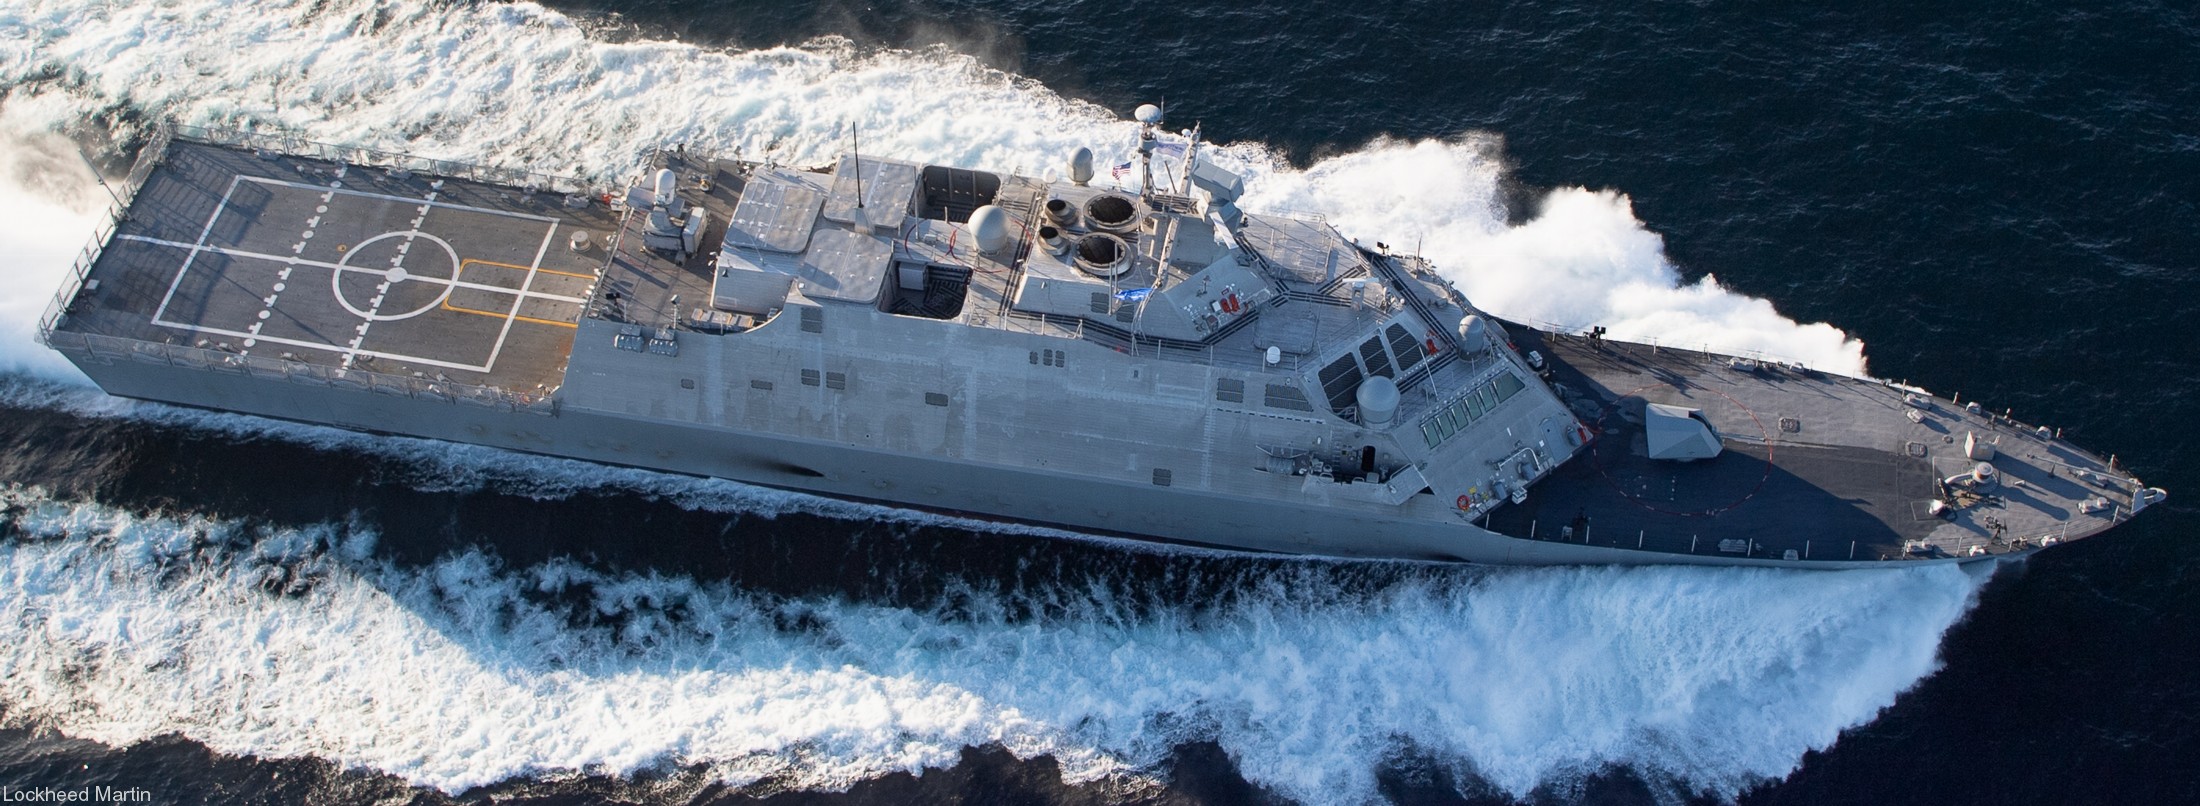 lcs-23 uss cooperstown freedom class littoral combat ship us navy 23